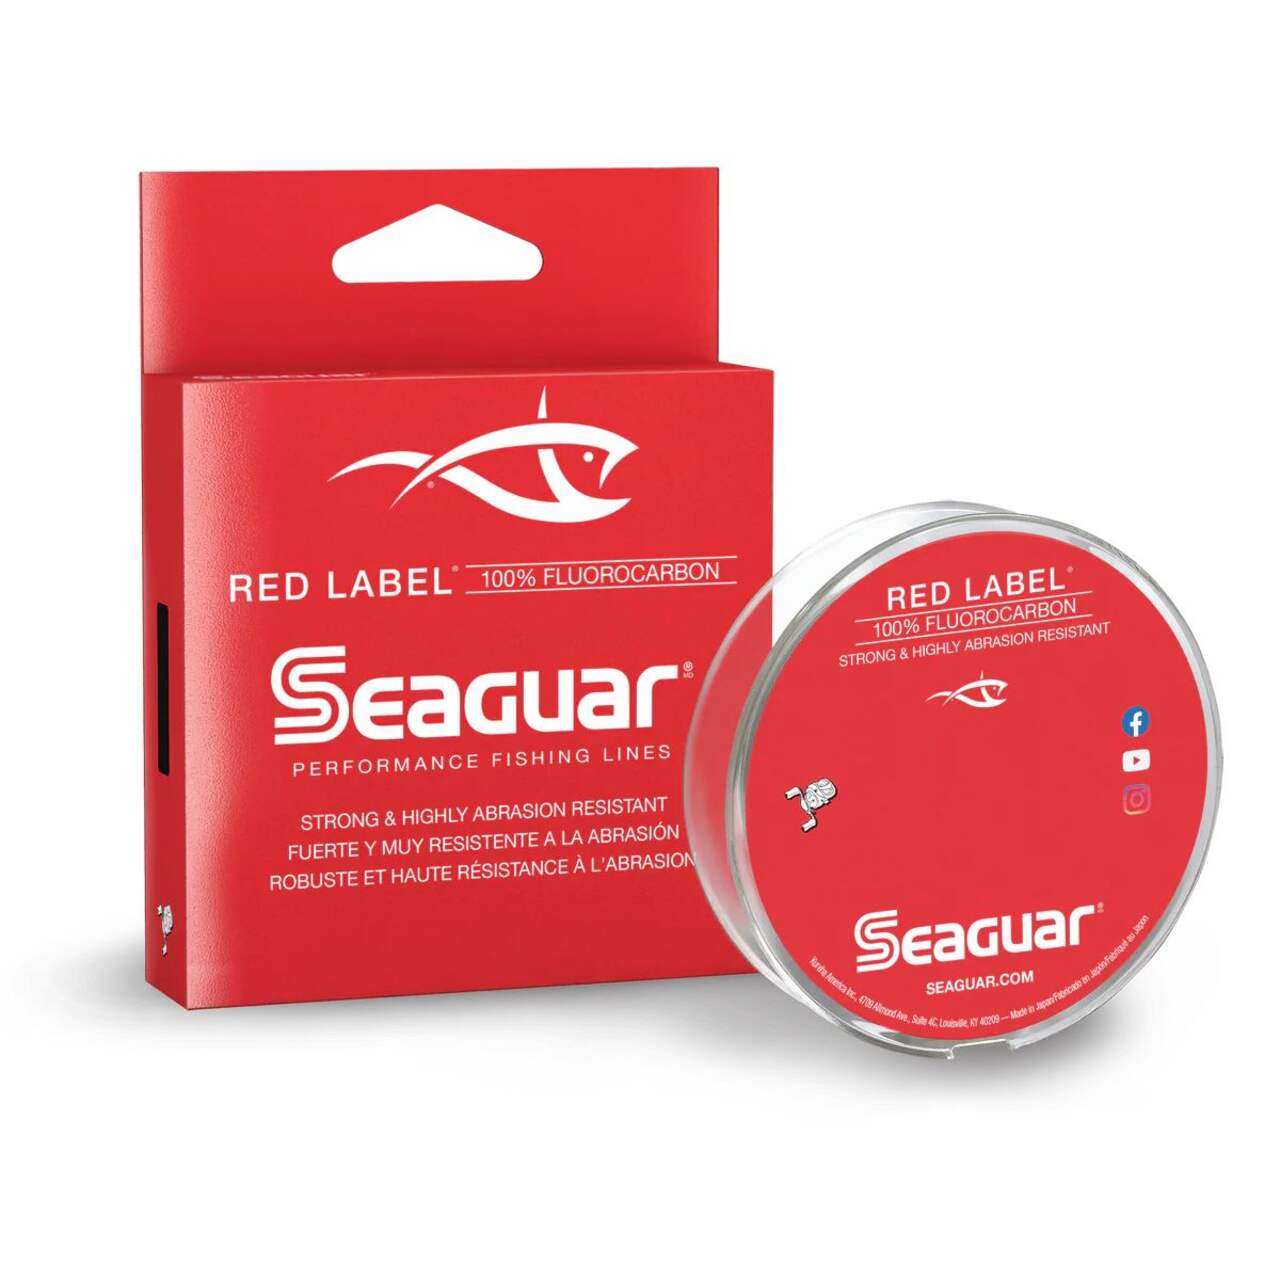 Seaguar Red Label Fluorocarbon Fishing Line, Clear